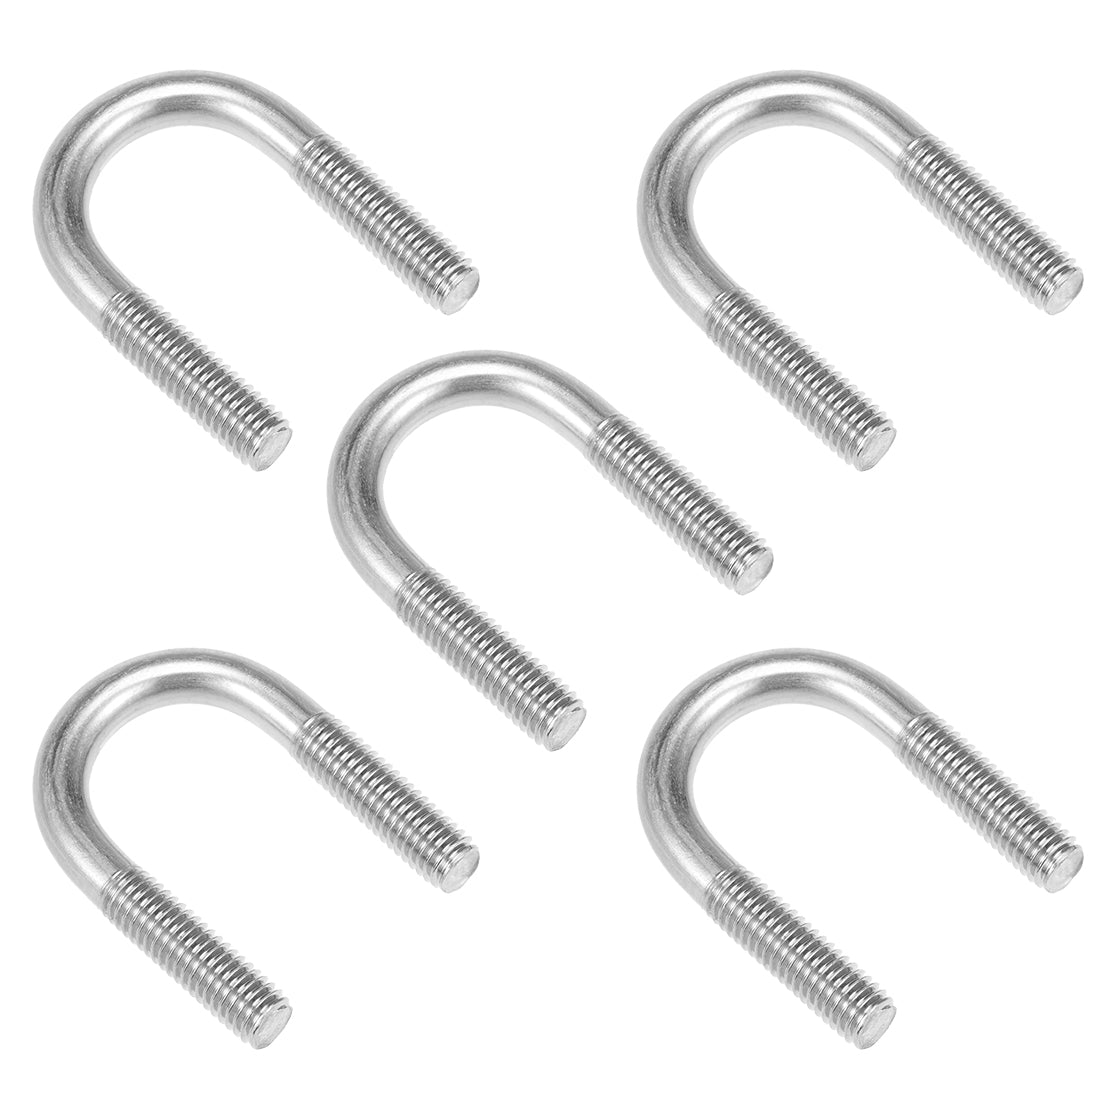 uxcell Uxcell U-Bolts 24mm Inner Width 304 Stainless Steel M8 U-Bolt for 22mm Pipe Dia 5pcs